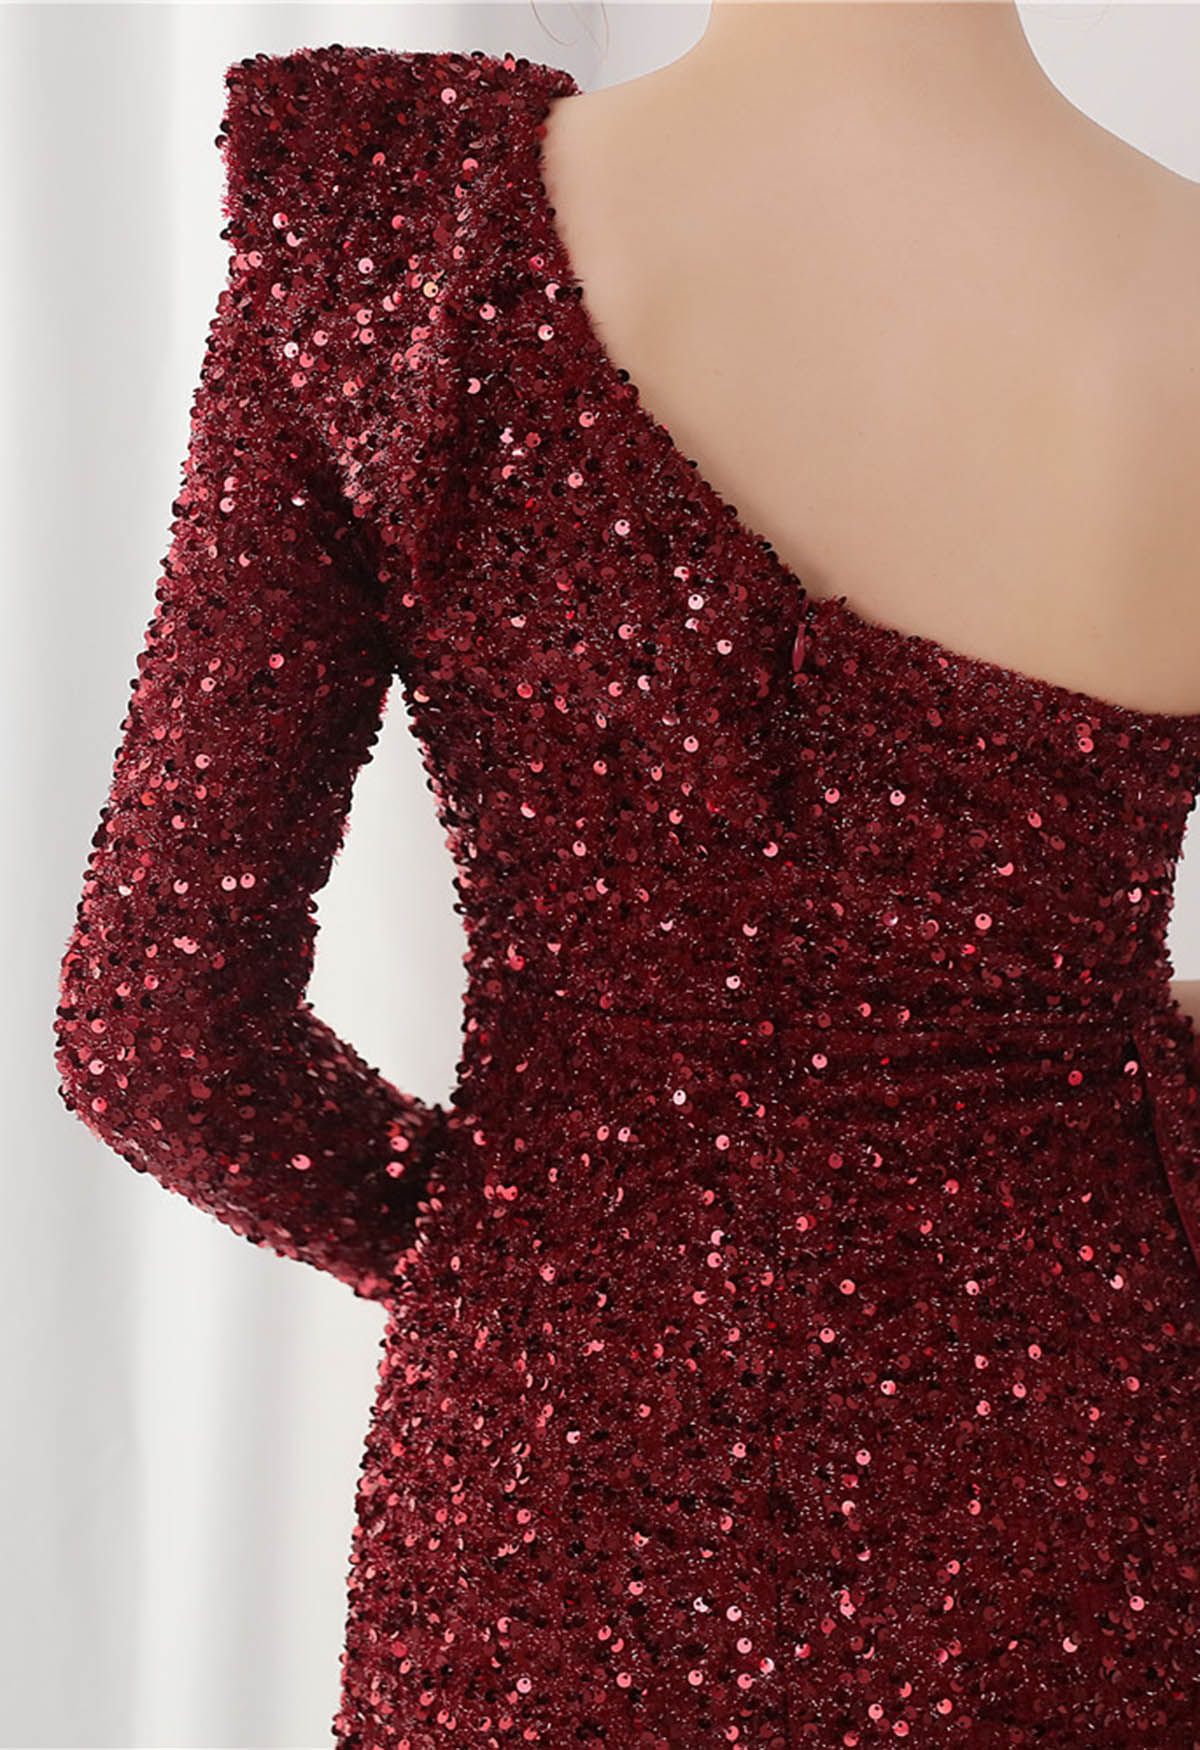 One-Shoulder Sequined Ruffle Slit Maxi Gown in Burgundy